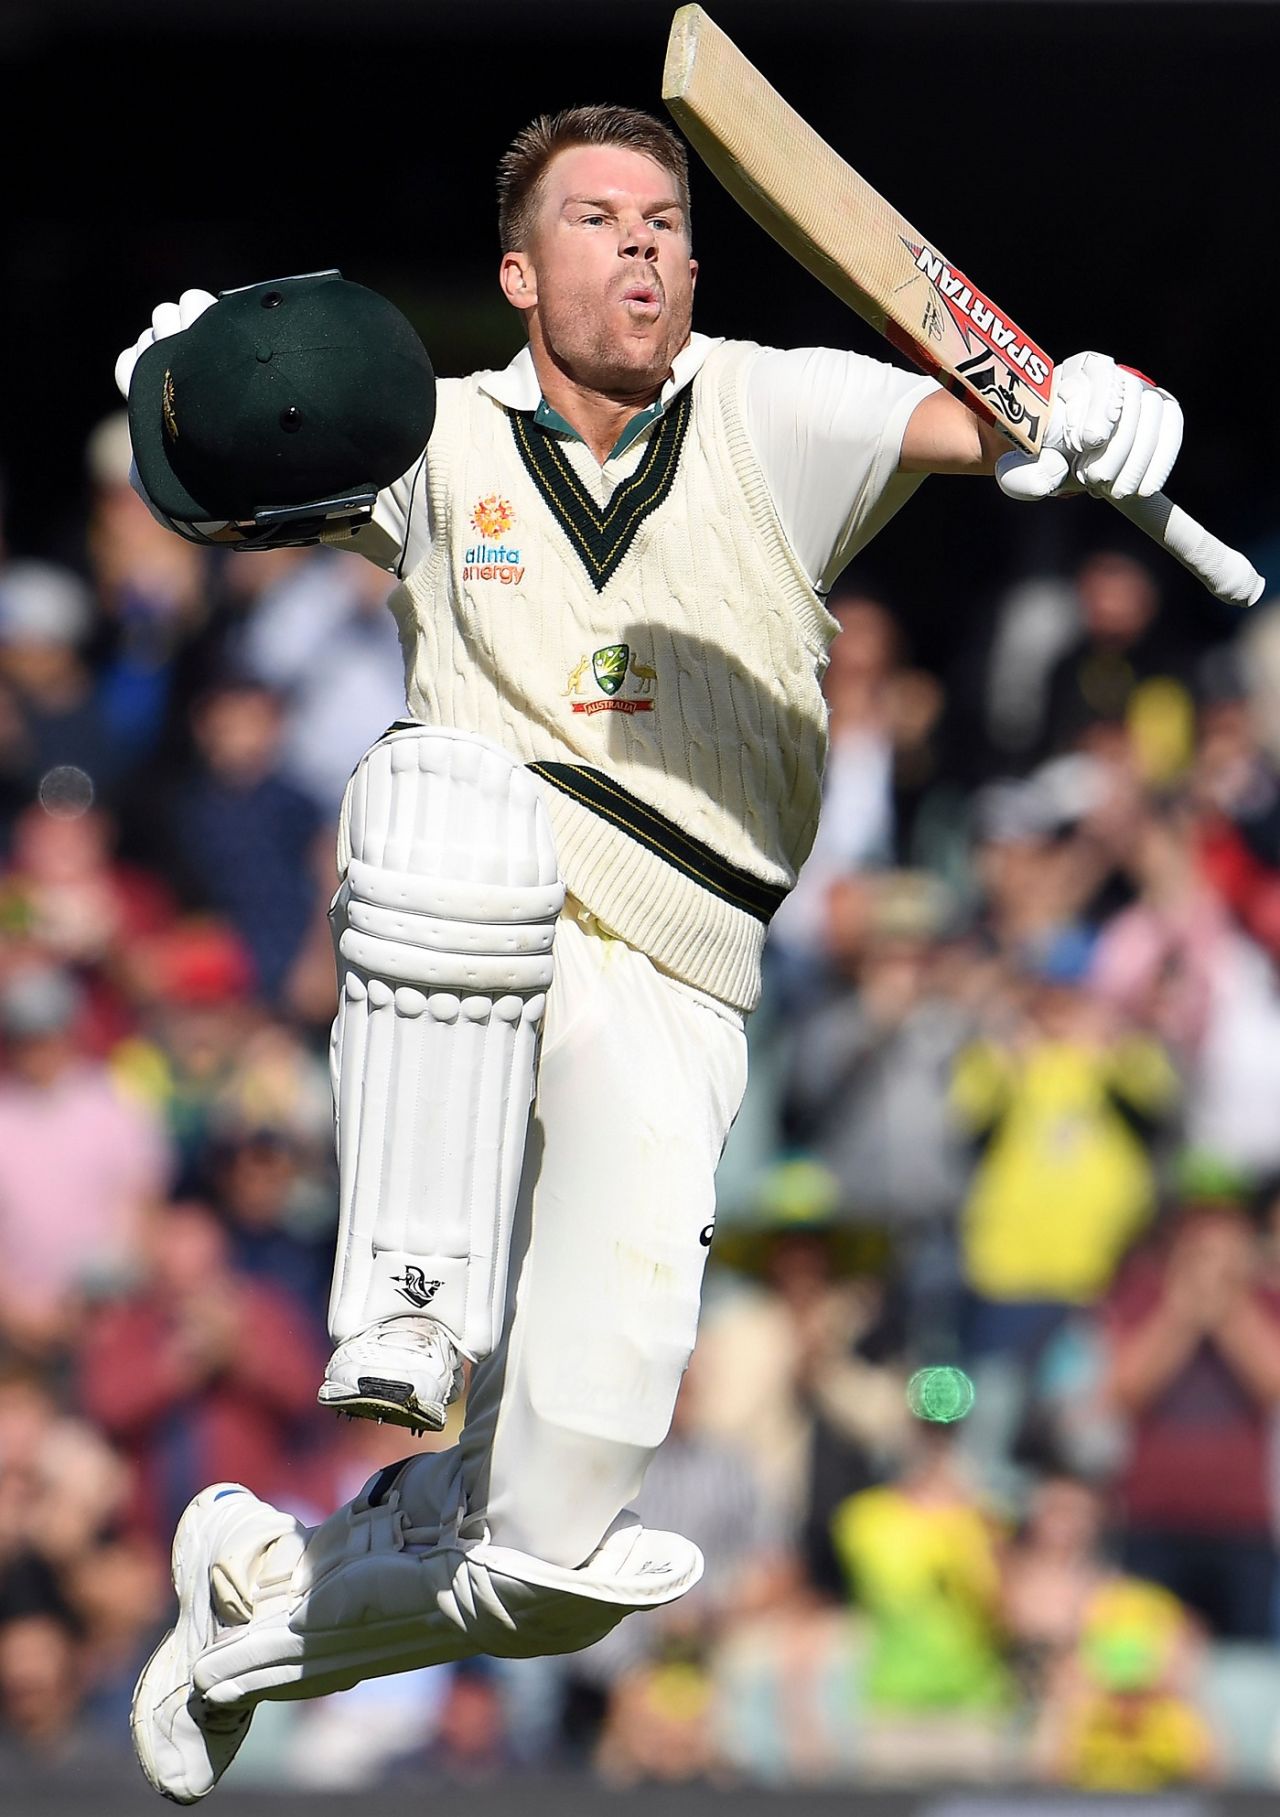 The leap - David Warner goes higher than he has before, Australia v Pakistan, 2nd Test, Adelaide, 2nd day, November 30, 2019